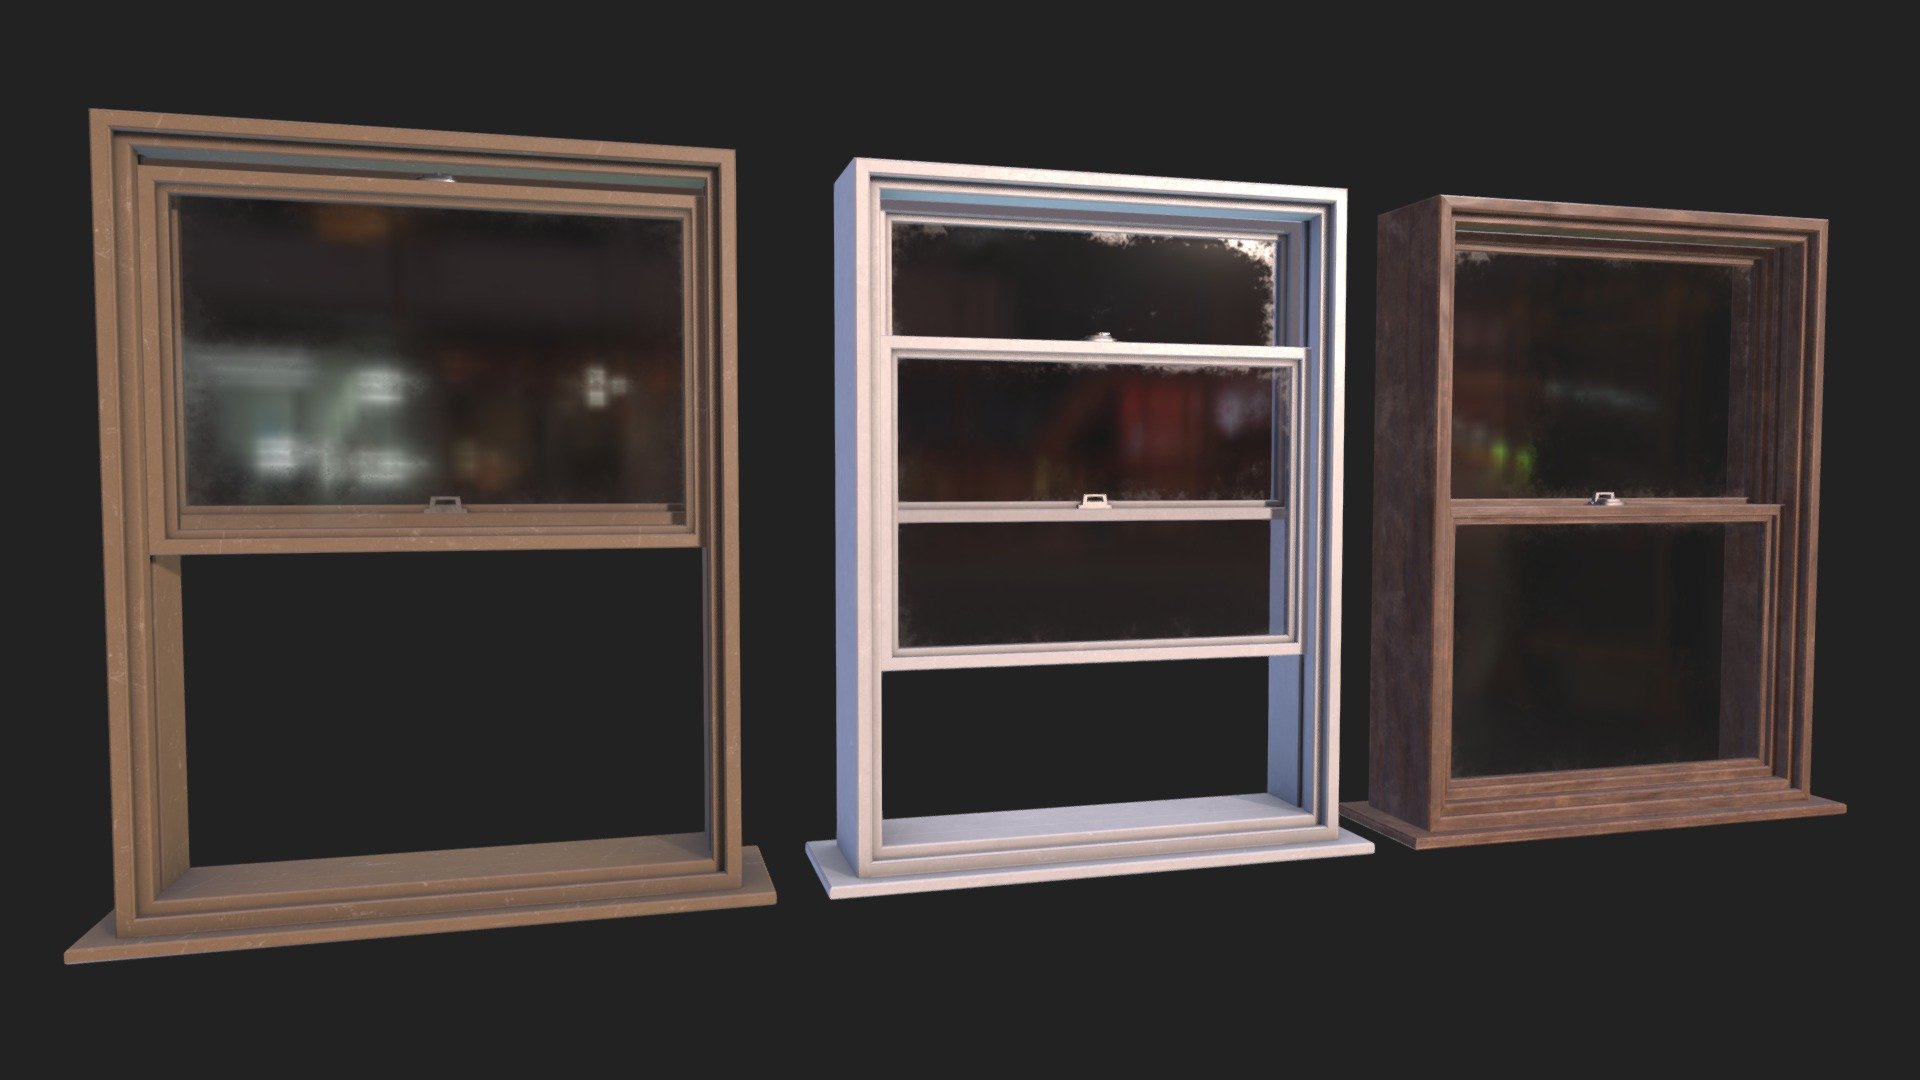 3x 2048x2048 texture packs (PBR Metal Rough, Unity HDRP, Unity Standard Metallic and UE4):

White, Brown and Wooden material.

PBR Metal Rough: BaseColor, AO, Height, Normal, Roughness and Metallic;

Unity HDRP: BaseColor, MaskMap, Normal;

Unity Standard Metallic: AlbedoTransparency, MetallicSmoothness, Normal;

Unreal Engine 4: BaseColor, Normal, OcclusionRoughnessMetallic;

The package also has the .fbx, .obj, .stl, and .dae files 3d model